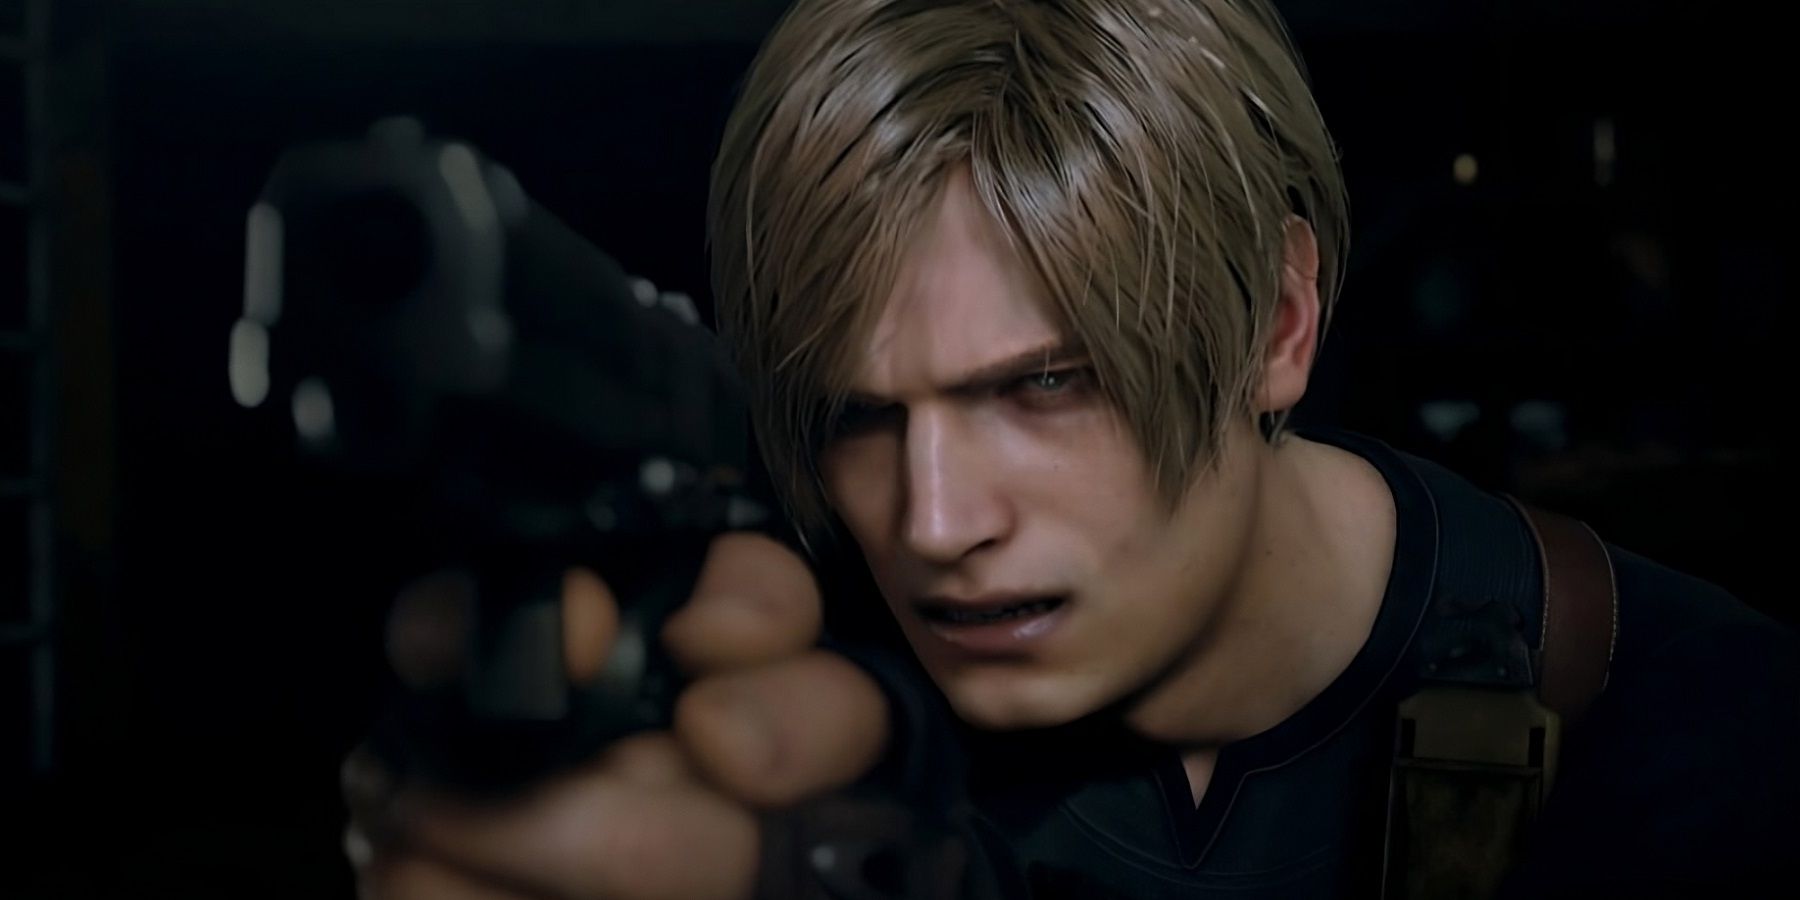 Resident Evil 4 Remake Has Game-Breaking Bug You Need to Watch Out For